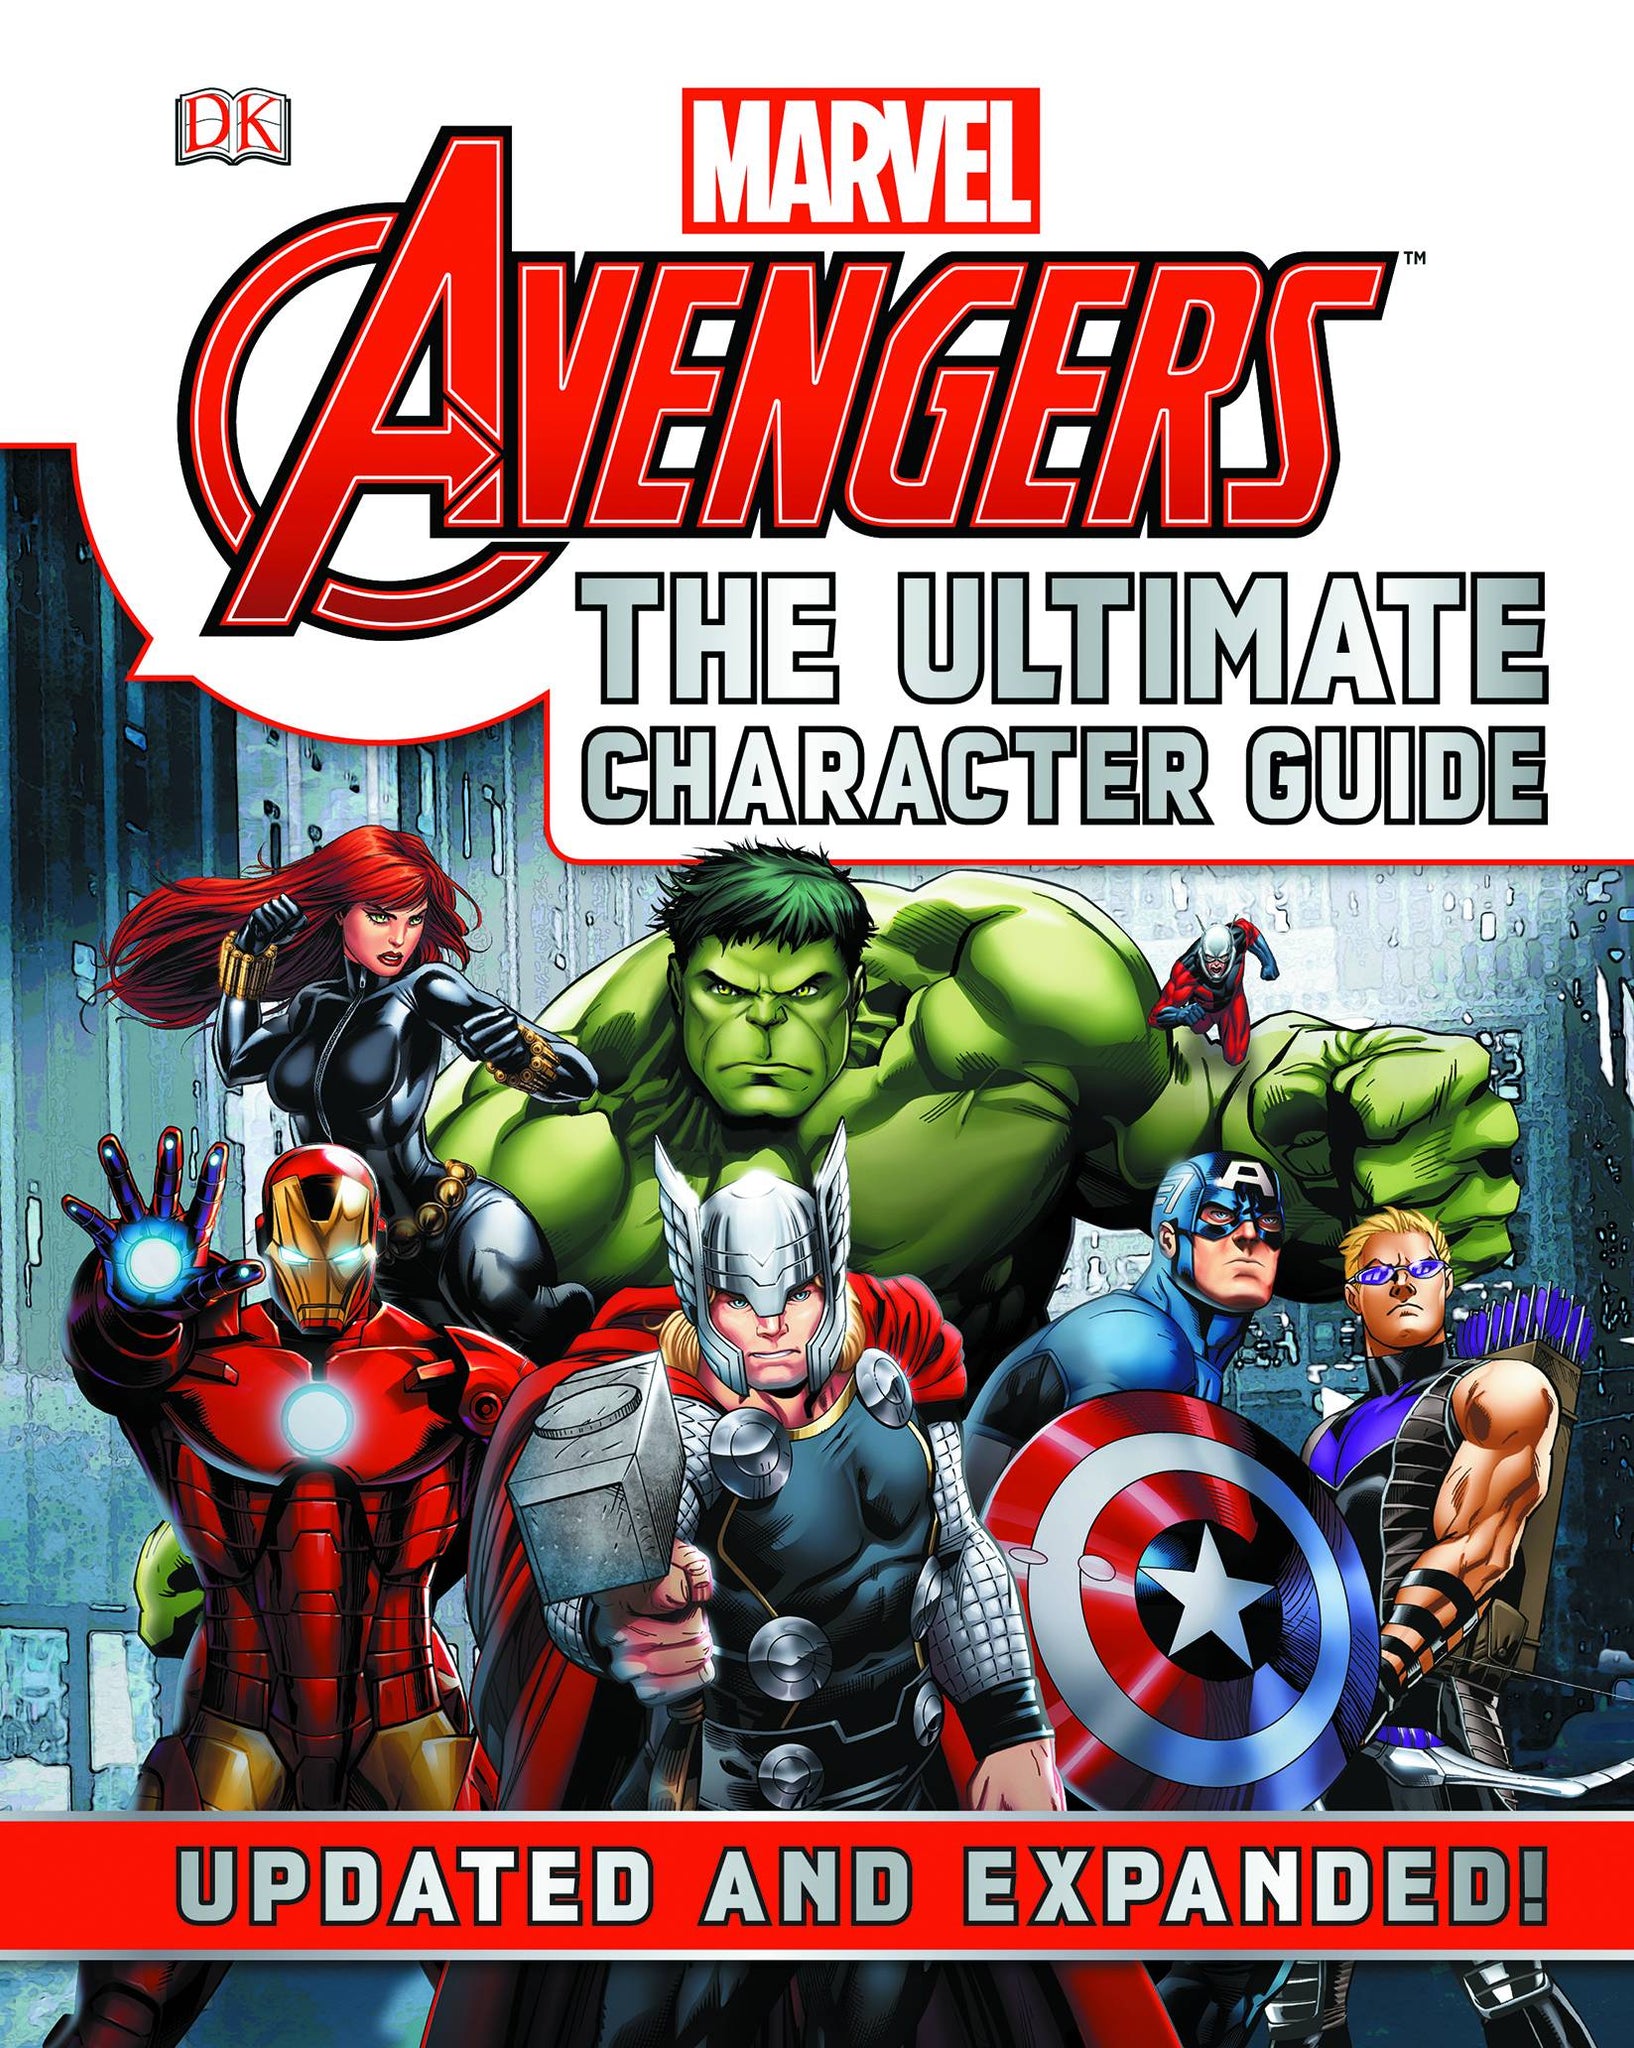 Marvel Avengers Ultimate Character Guide - Updated And Expanded! HC